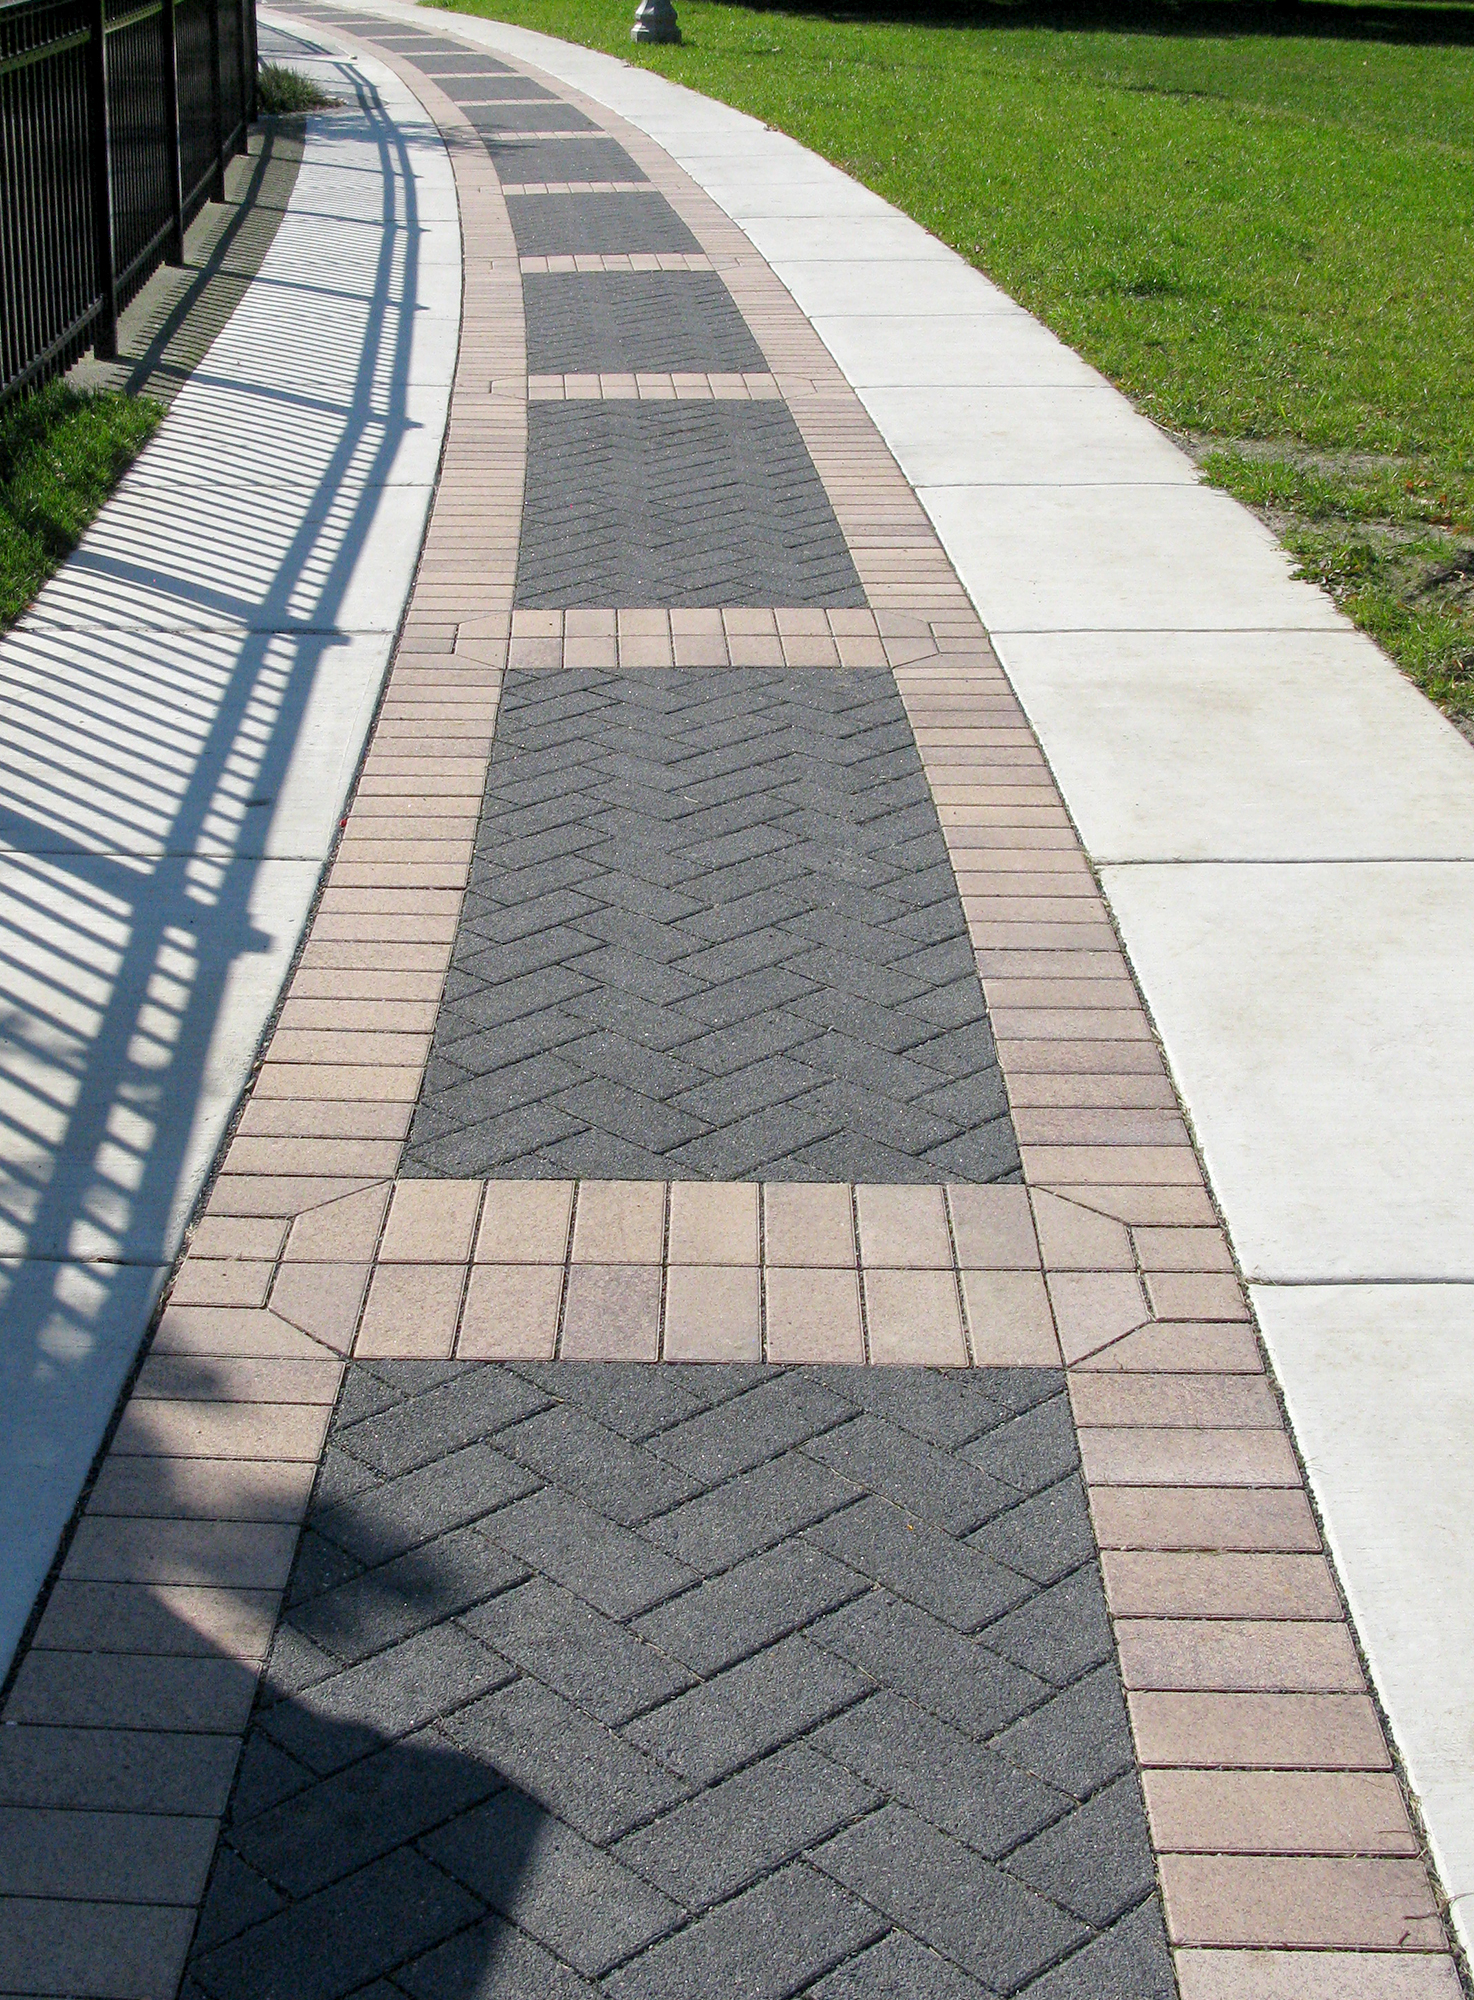 Black Series paver rugs are broken up by thick border bands of Eco-Priora in a warm tone, delineating a walkway along the plaza.